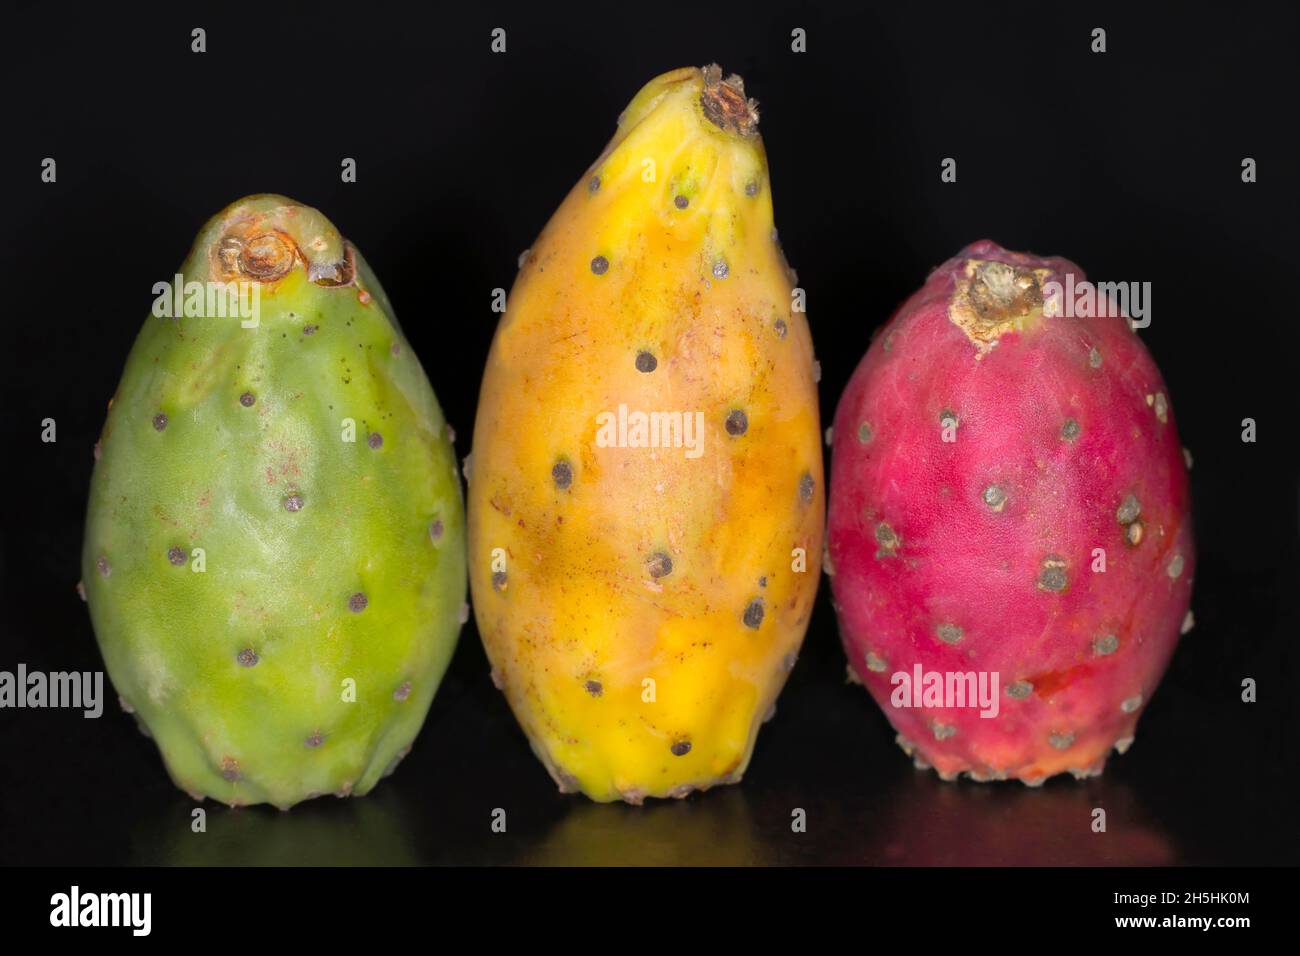 Cactus fruits in three different states of ripeness, studio photography with black background Stock Photo